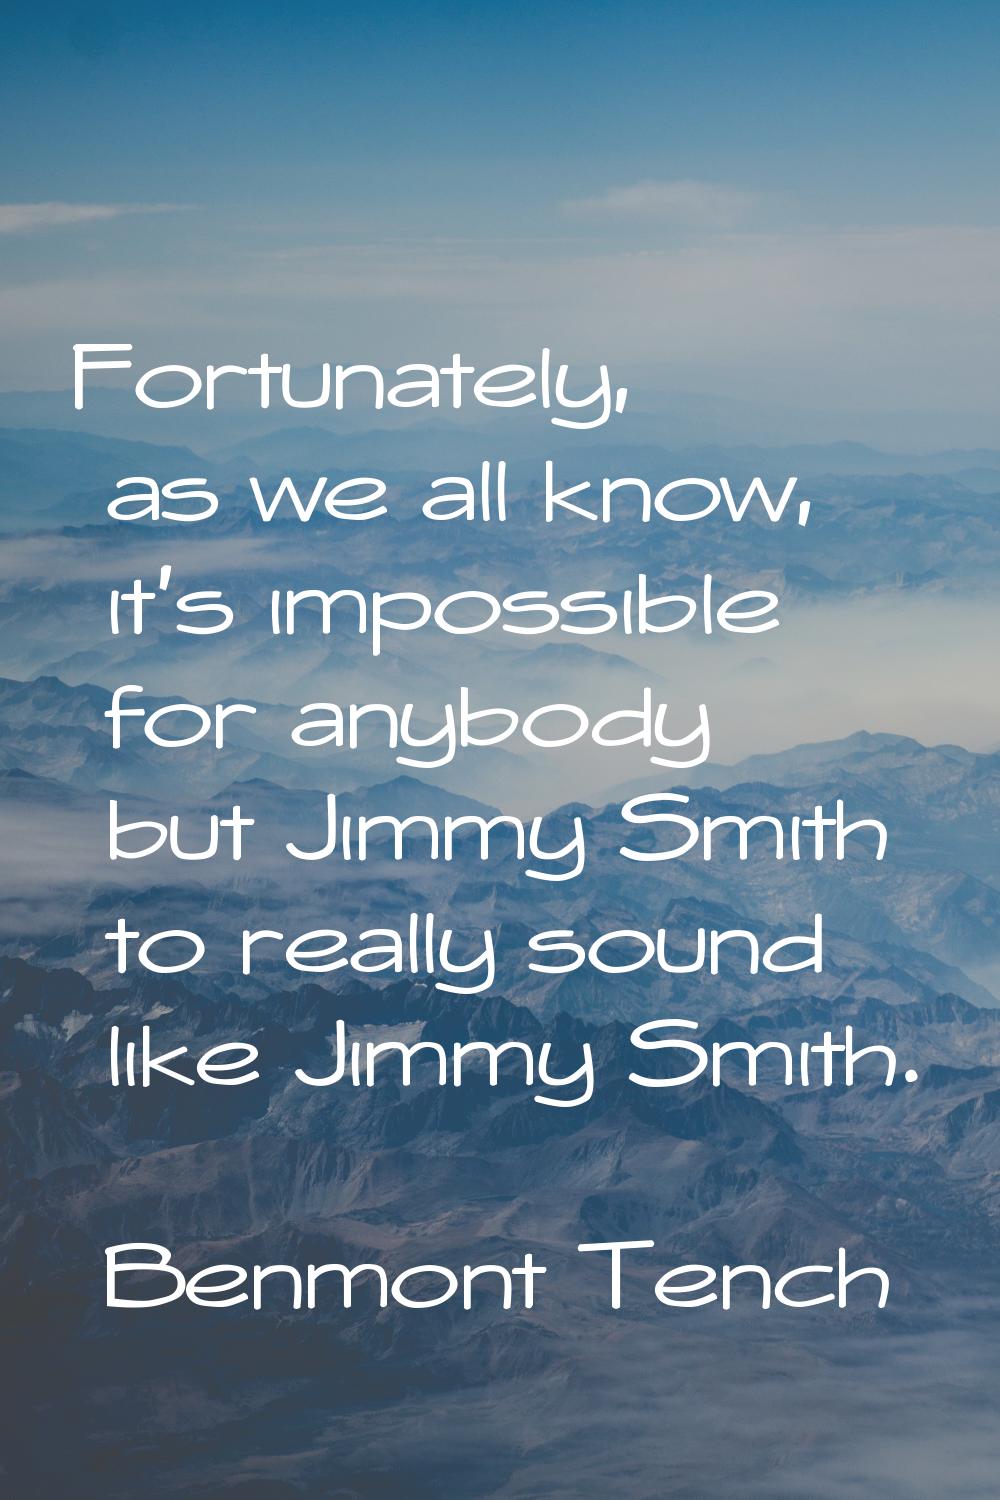 Fortunately, as we all know, it's impossible for anybody but Jimmy Smith to really sound like Jimmy